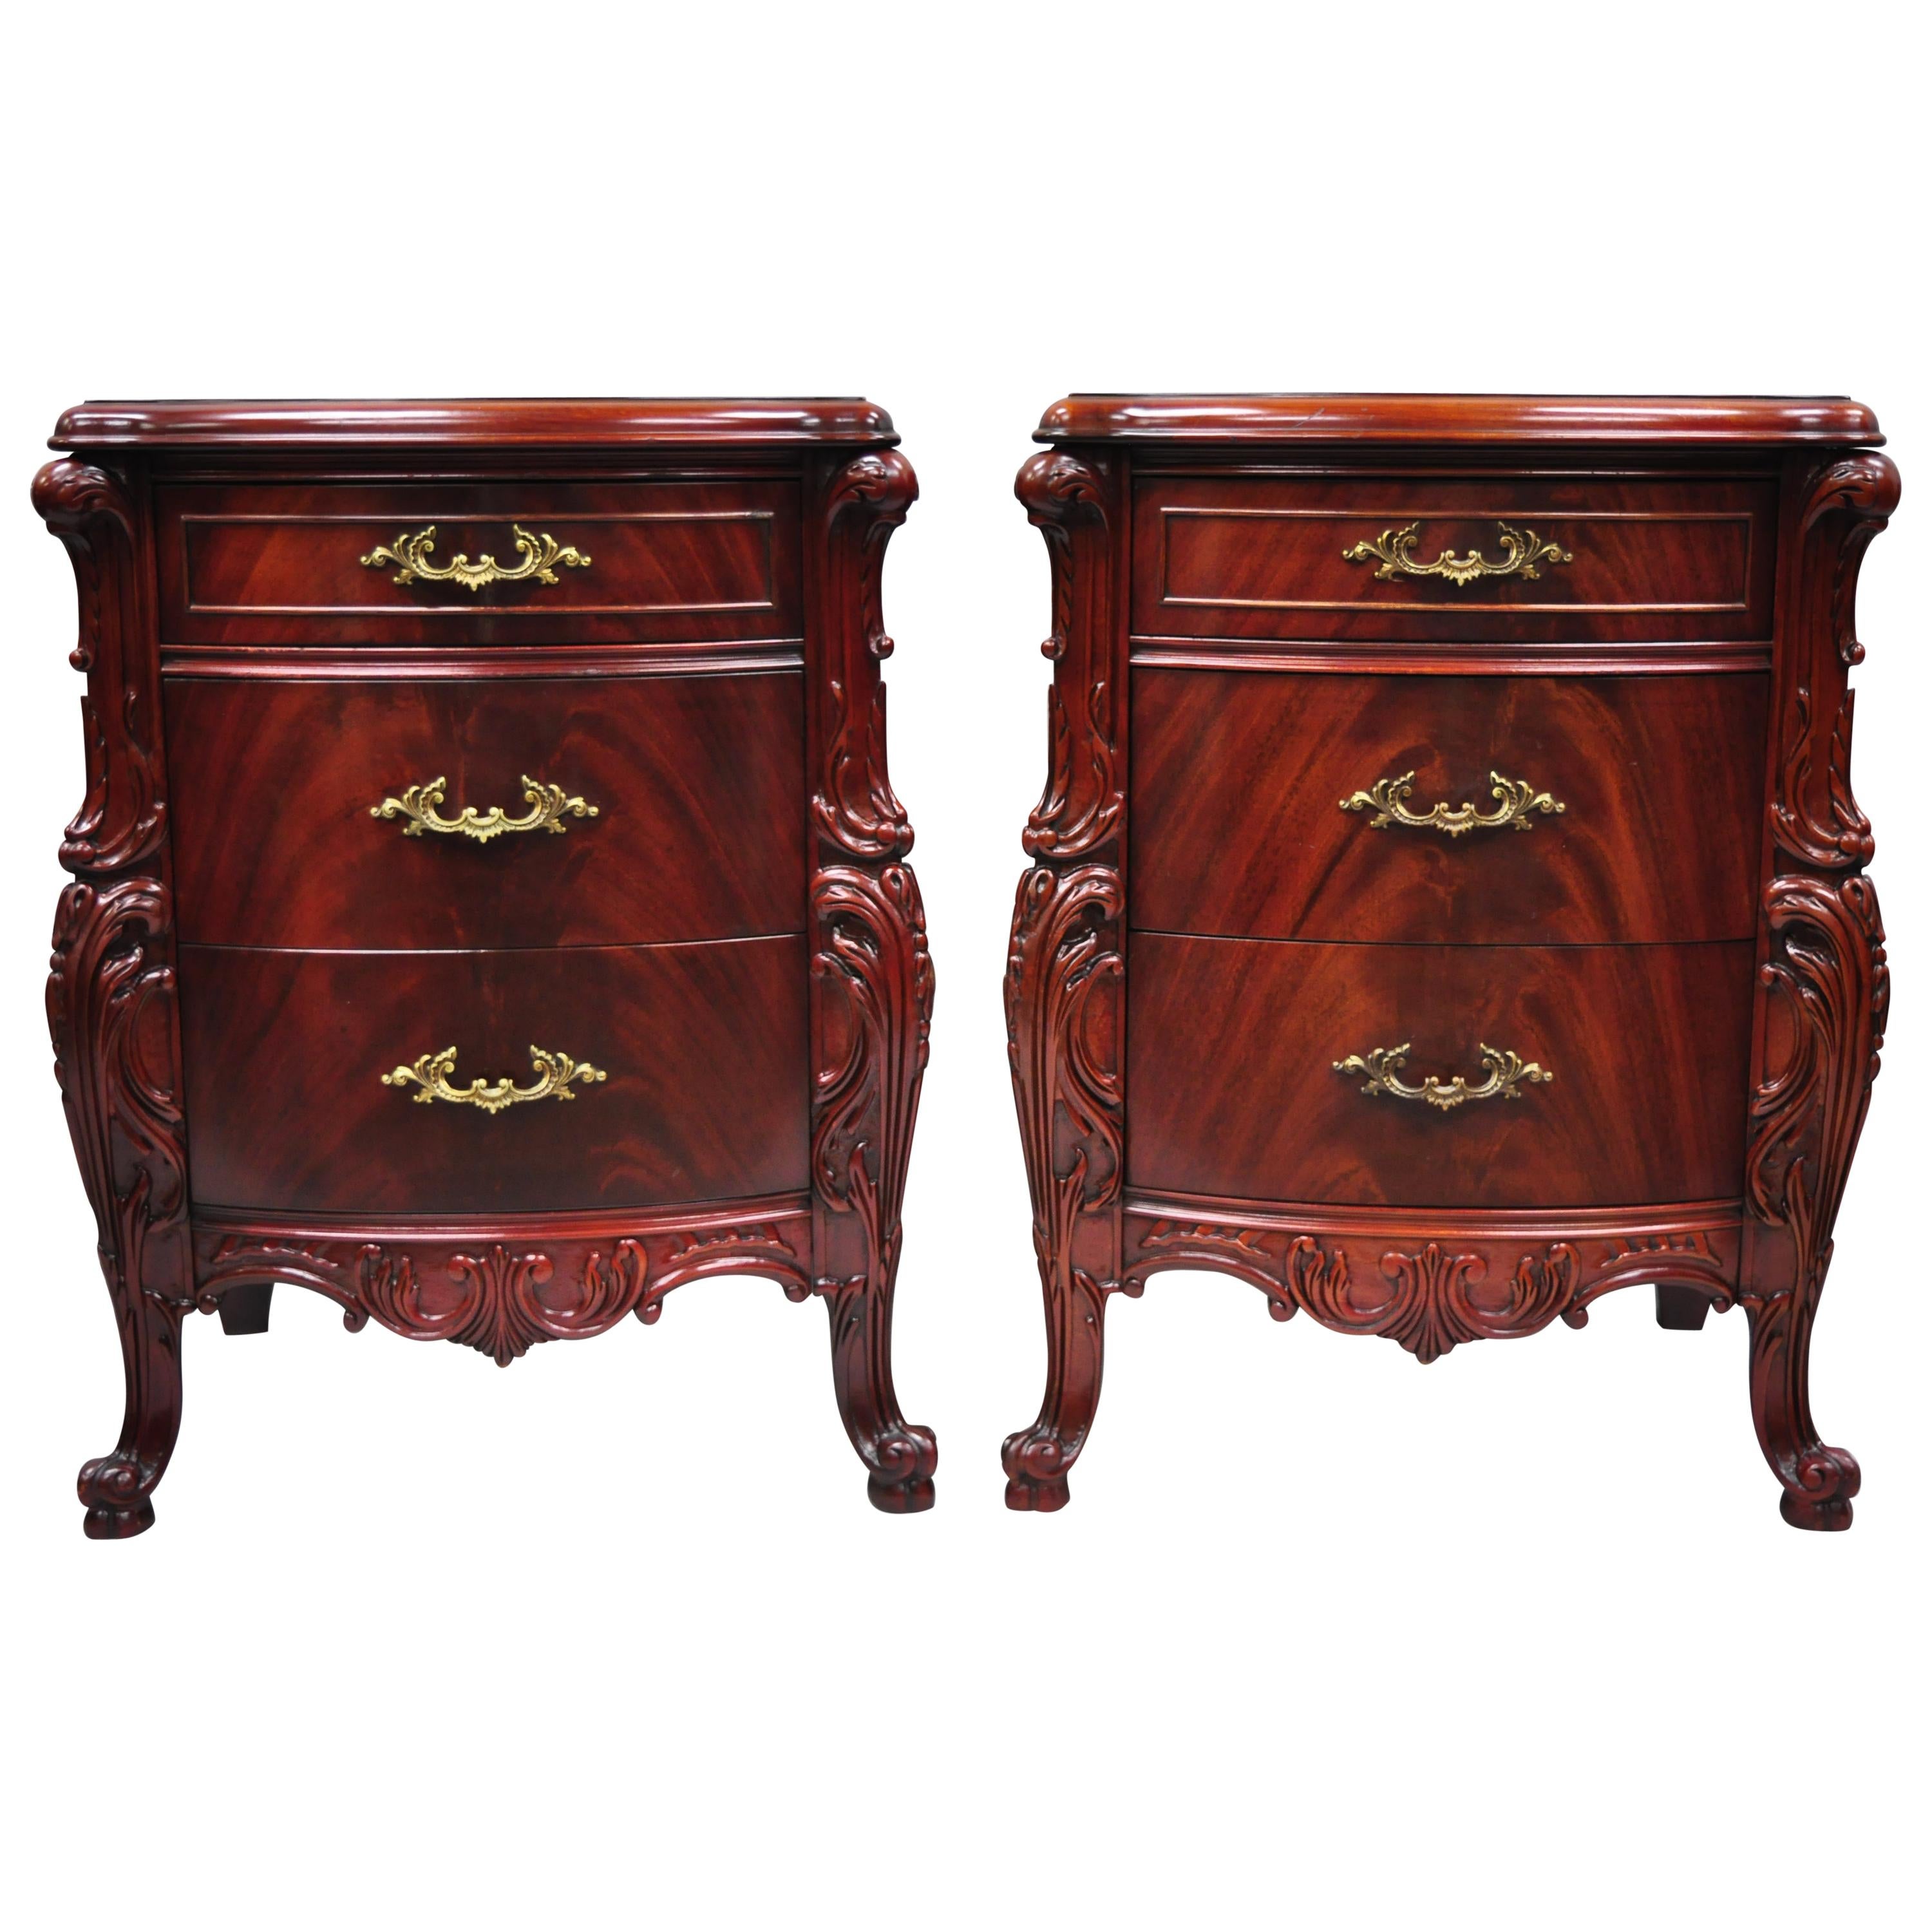 Pair Antique Flame Mahogany Carved French "Swan" Style Nightstands Bedside Table